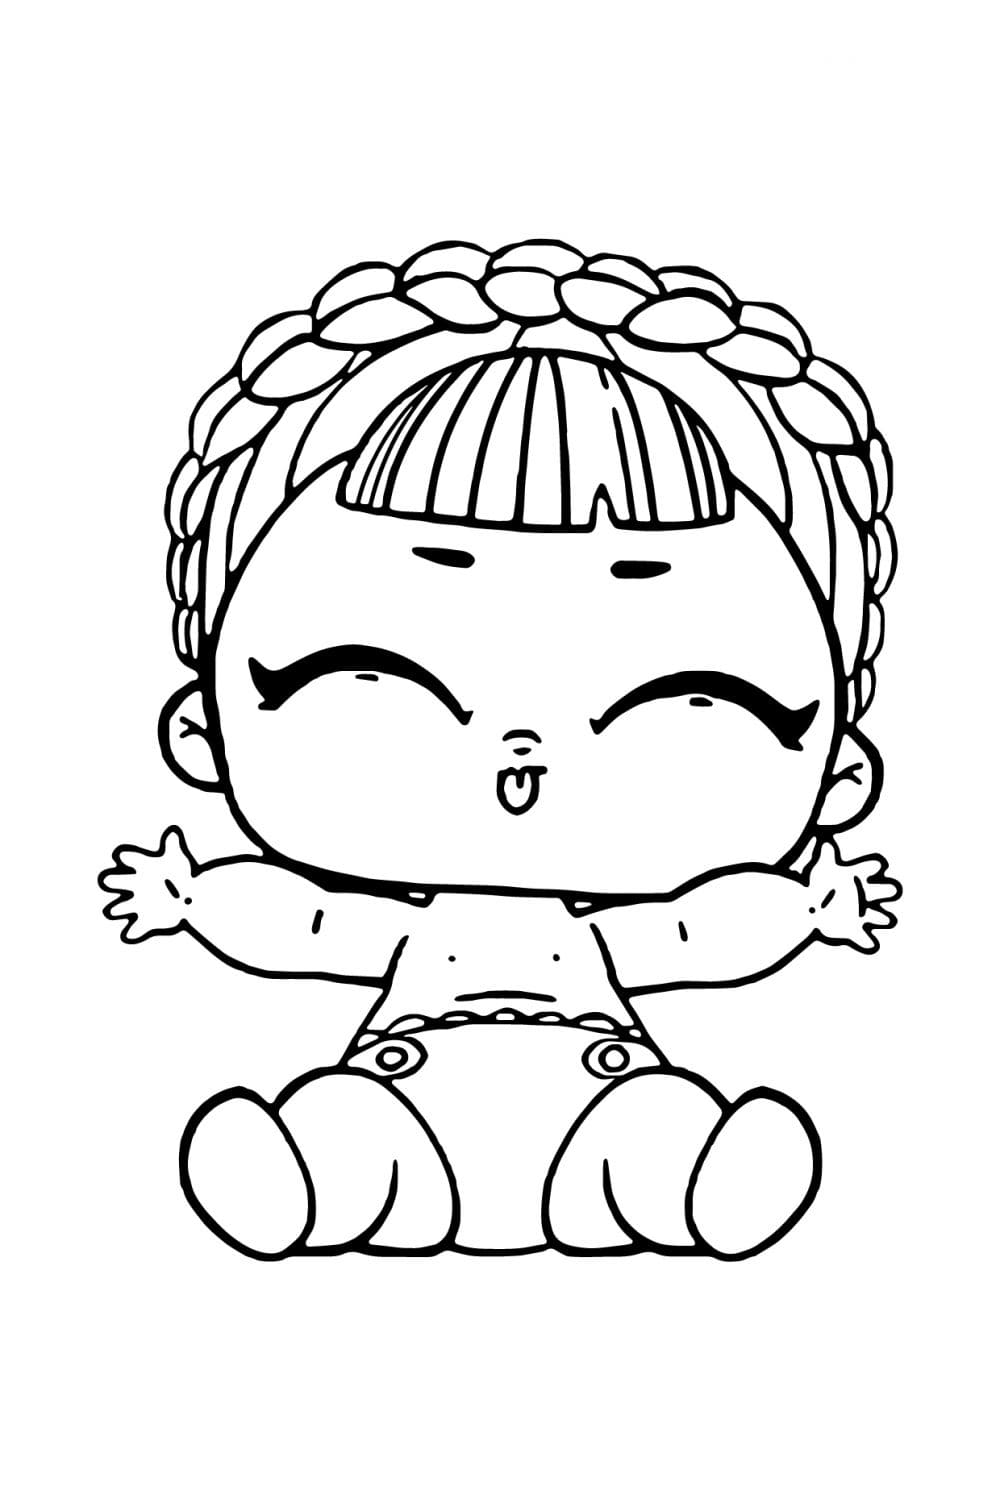 LOL Coloring Pages FREE Printable 131